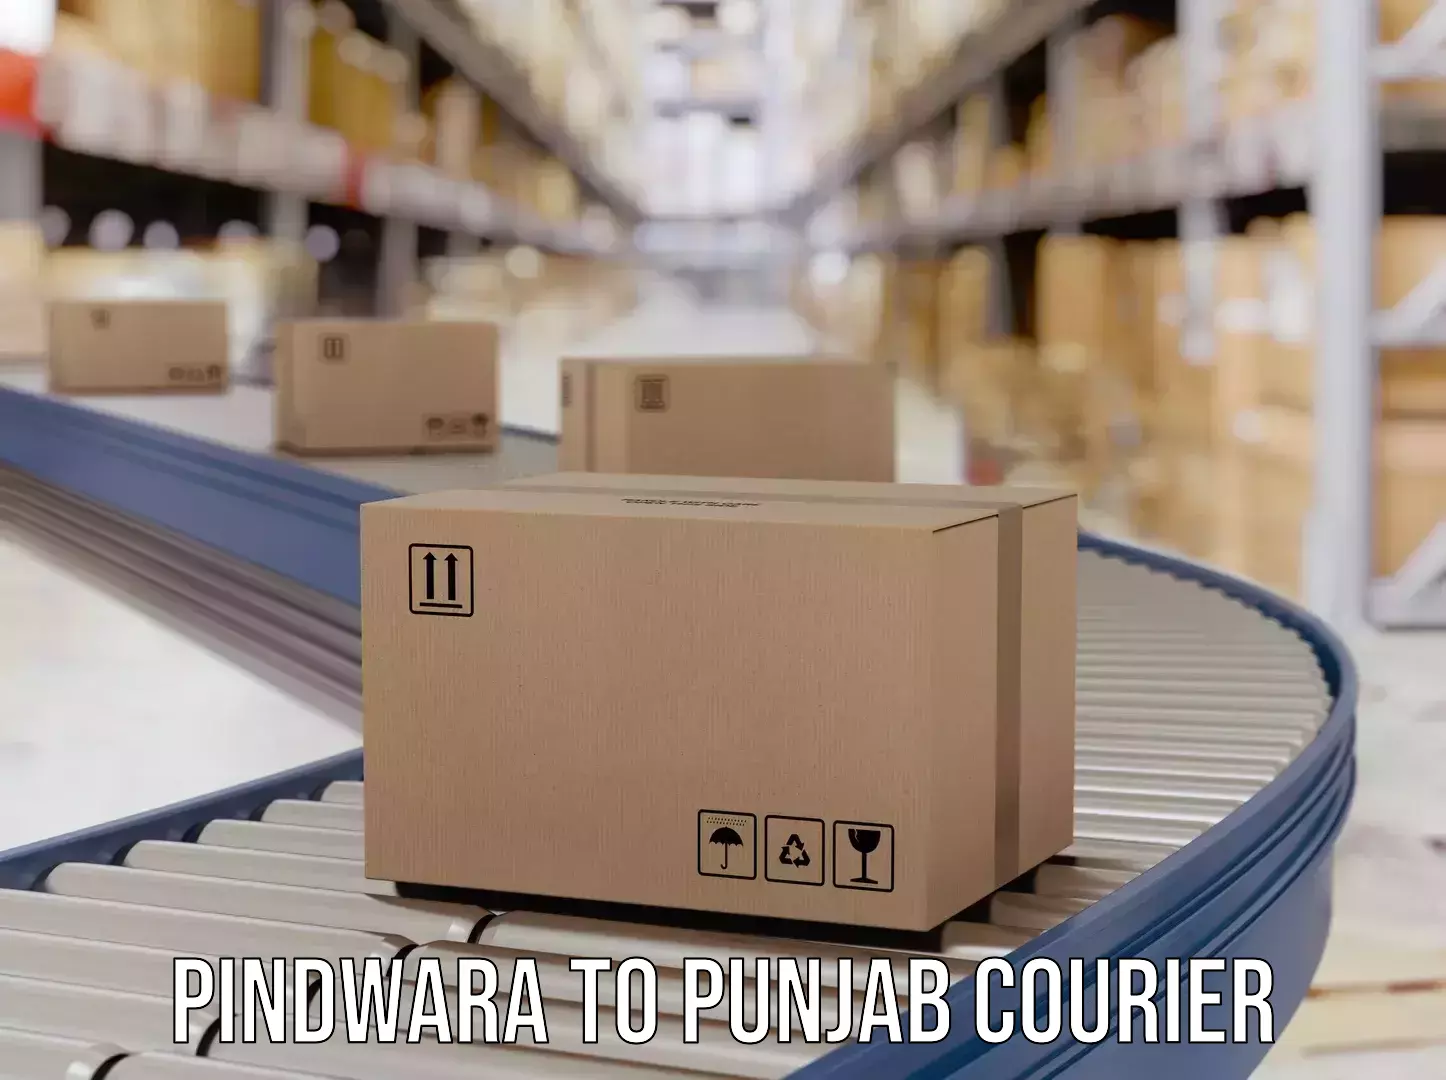 Reliable courier service in Pindwara to Barnala